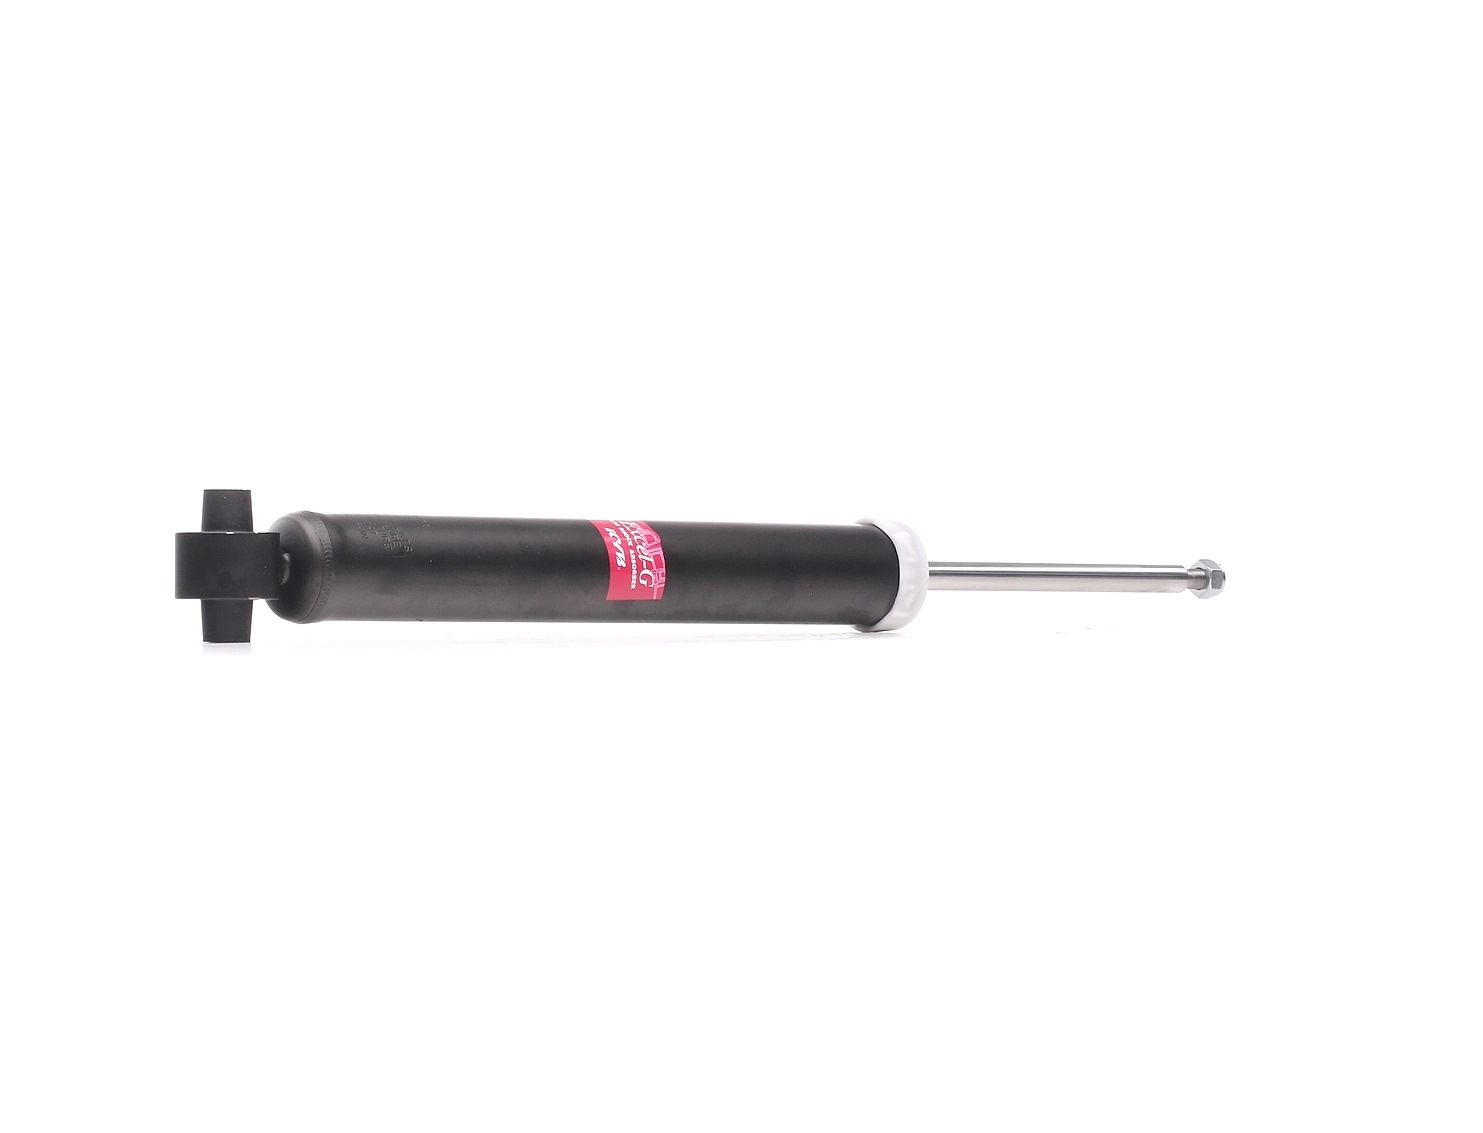 BMW 4 Series Shock absorber KYB 3448018 cheap